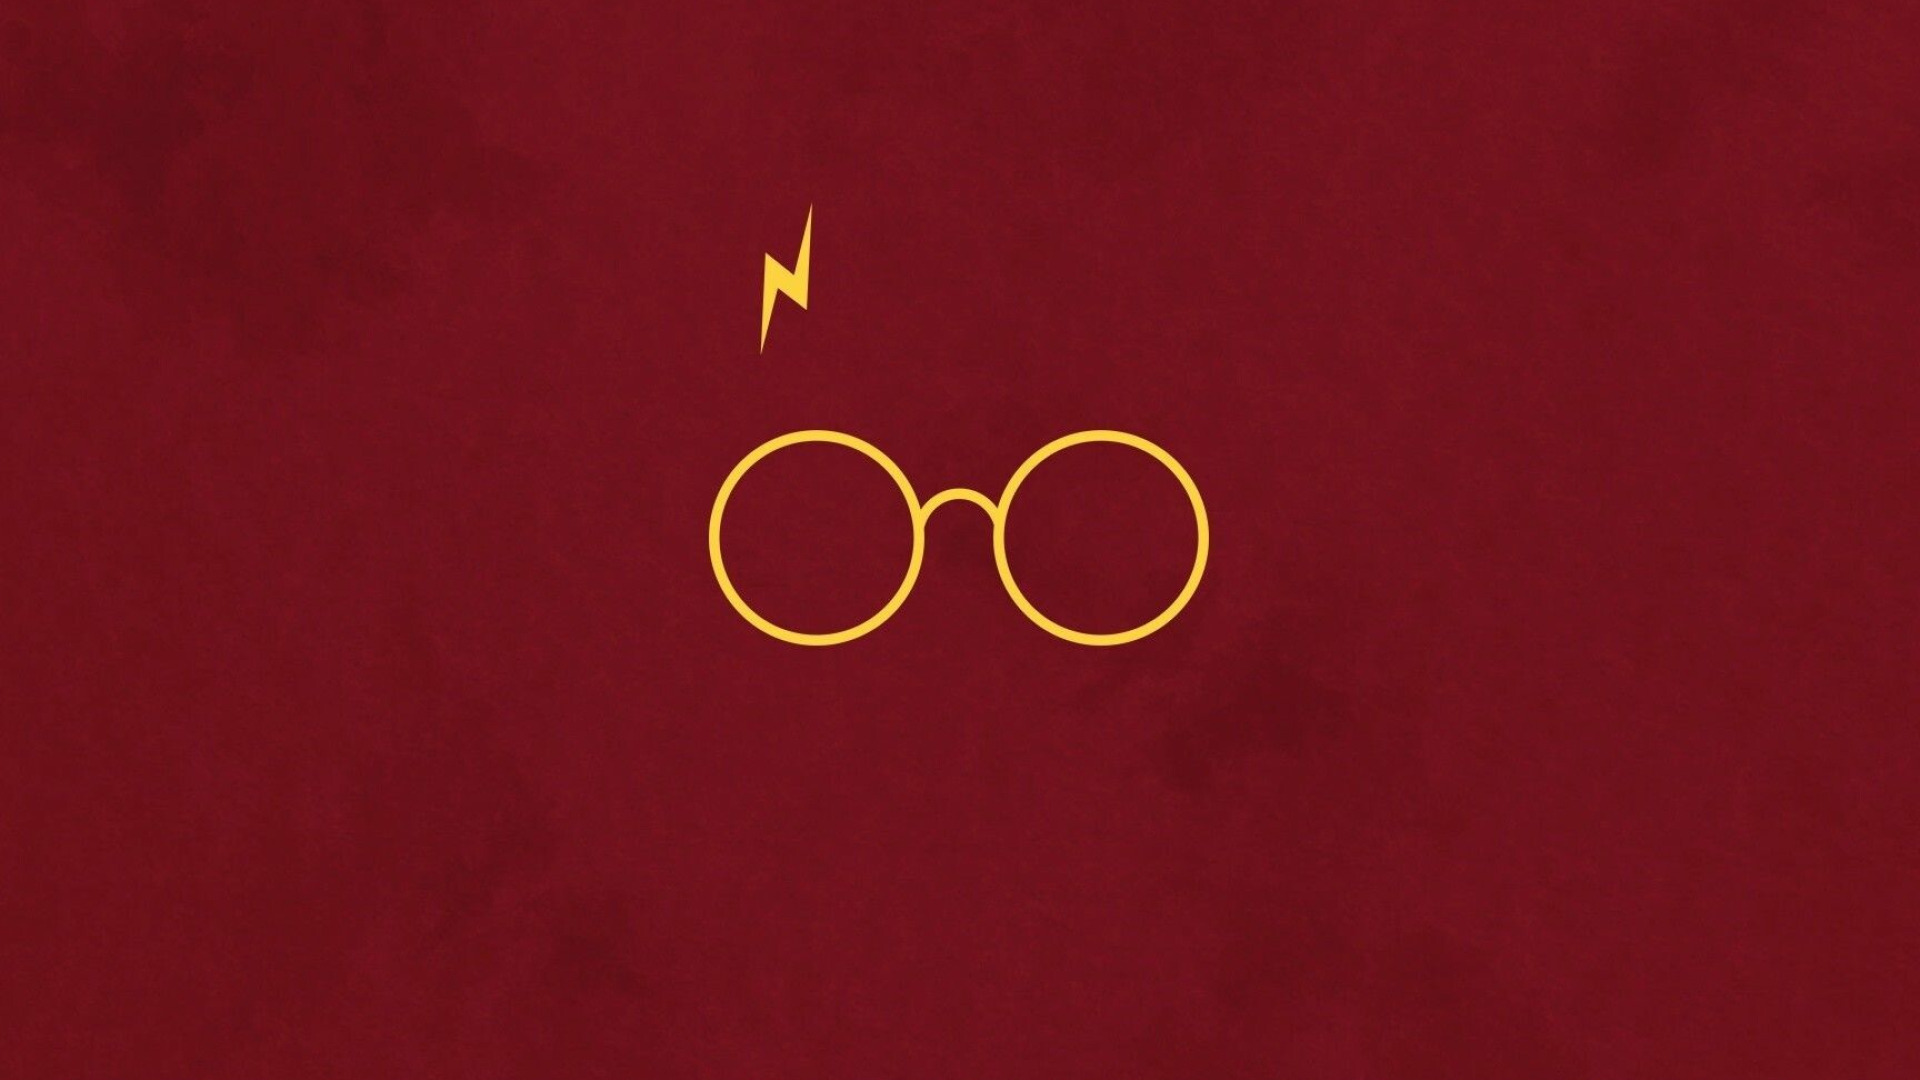 Harry Potter: The success of the books and films has allowed the HP franchise to expand with numerous derivative works. 1920x1080 Full HD Background.